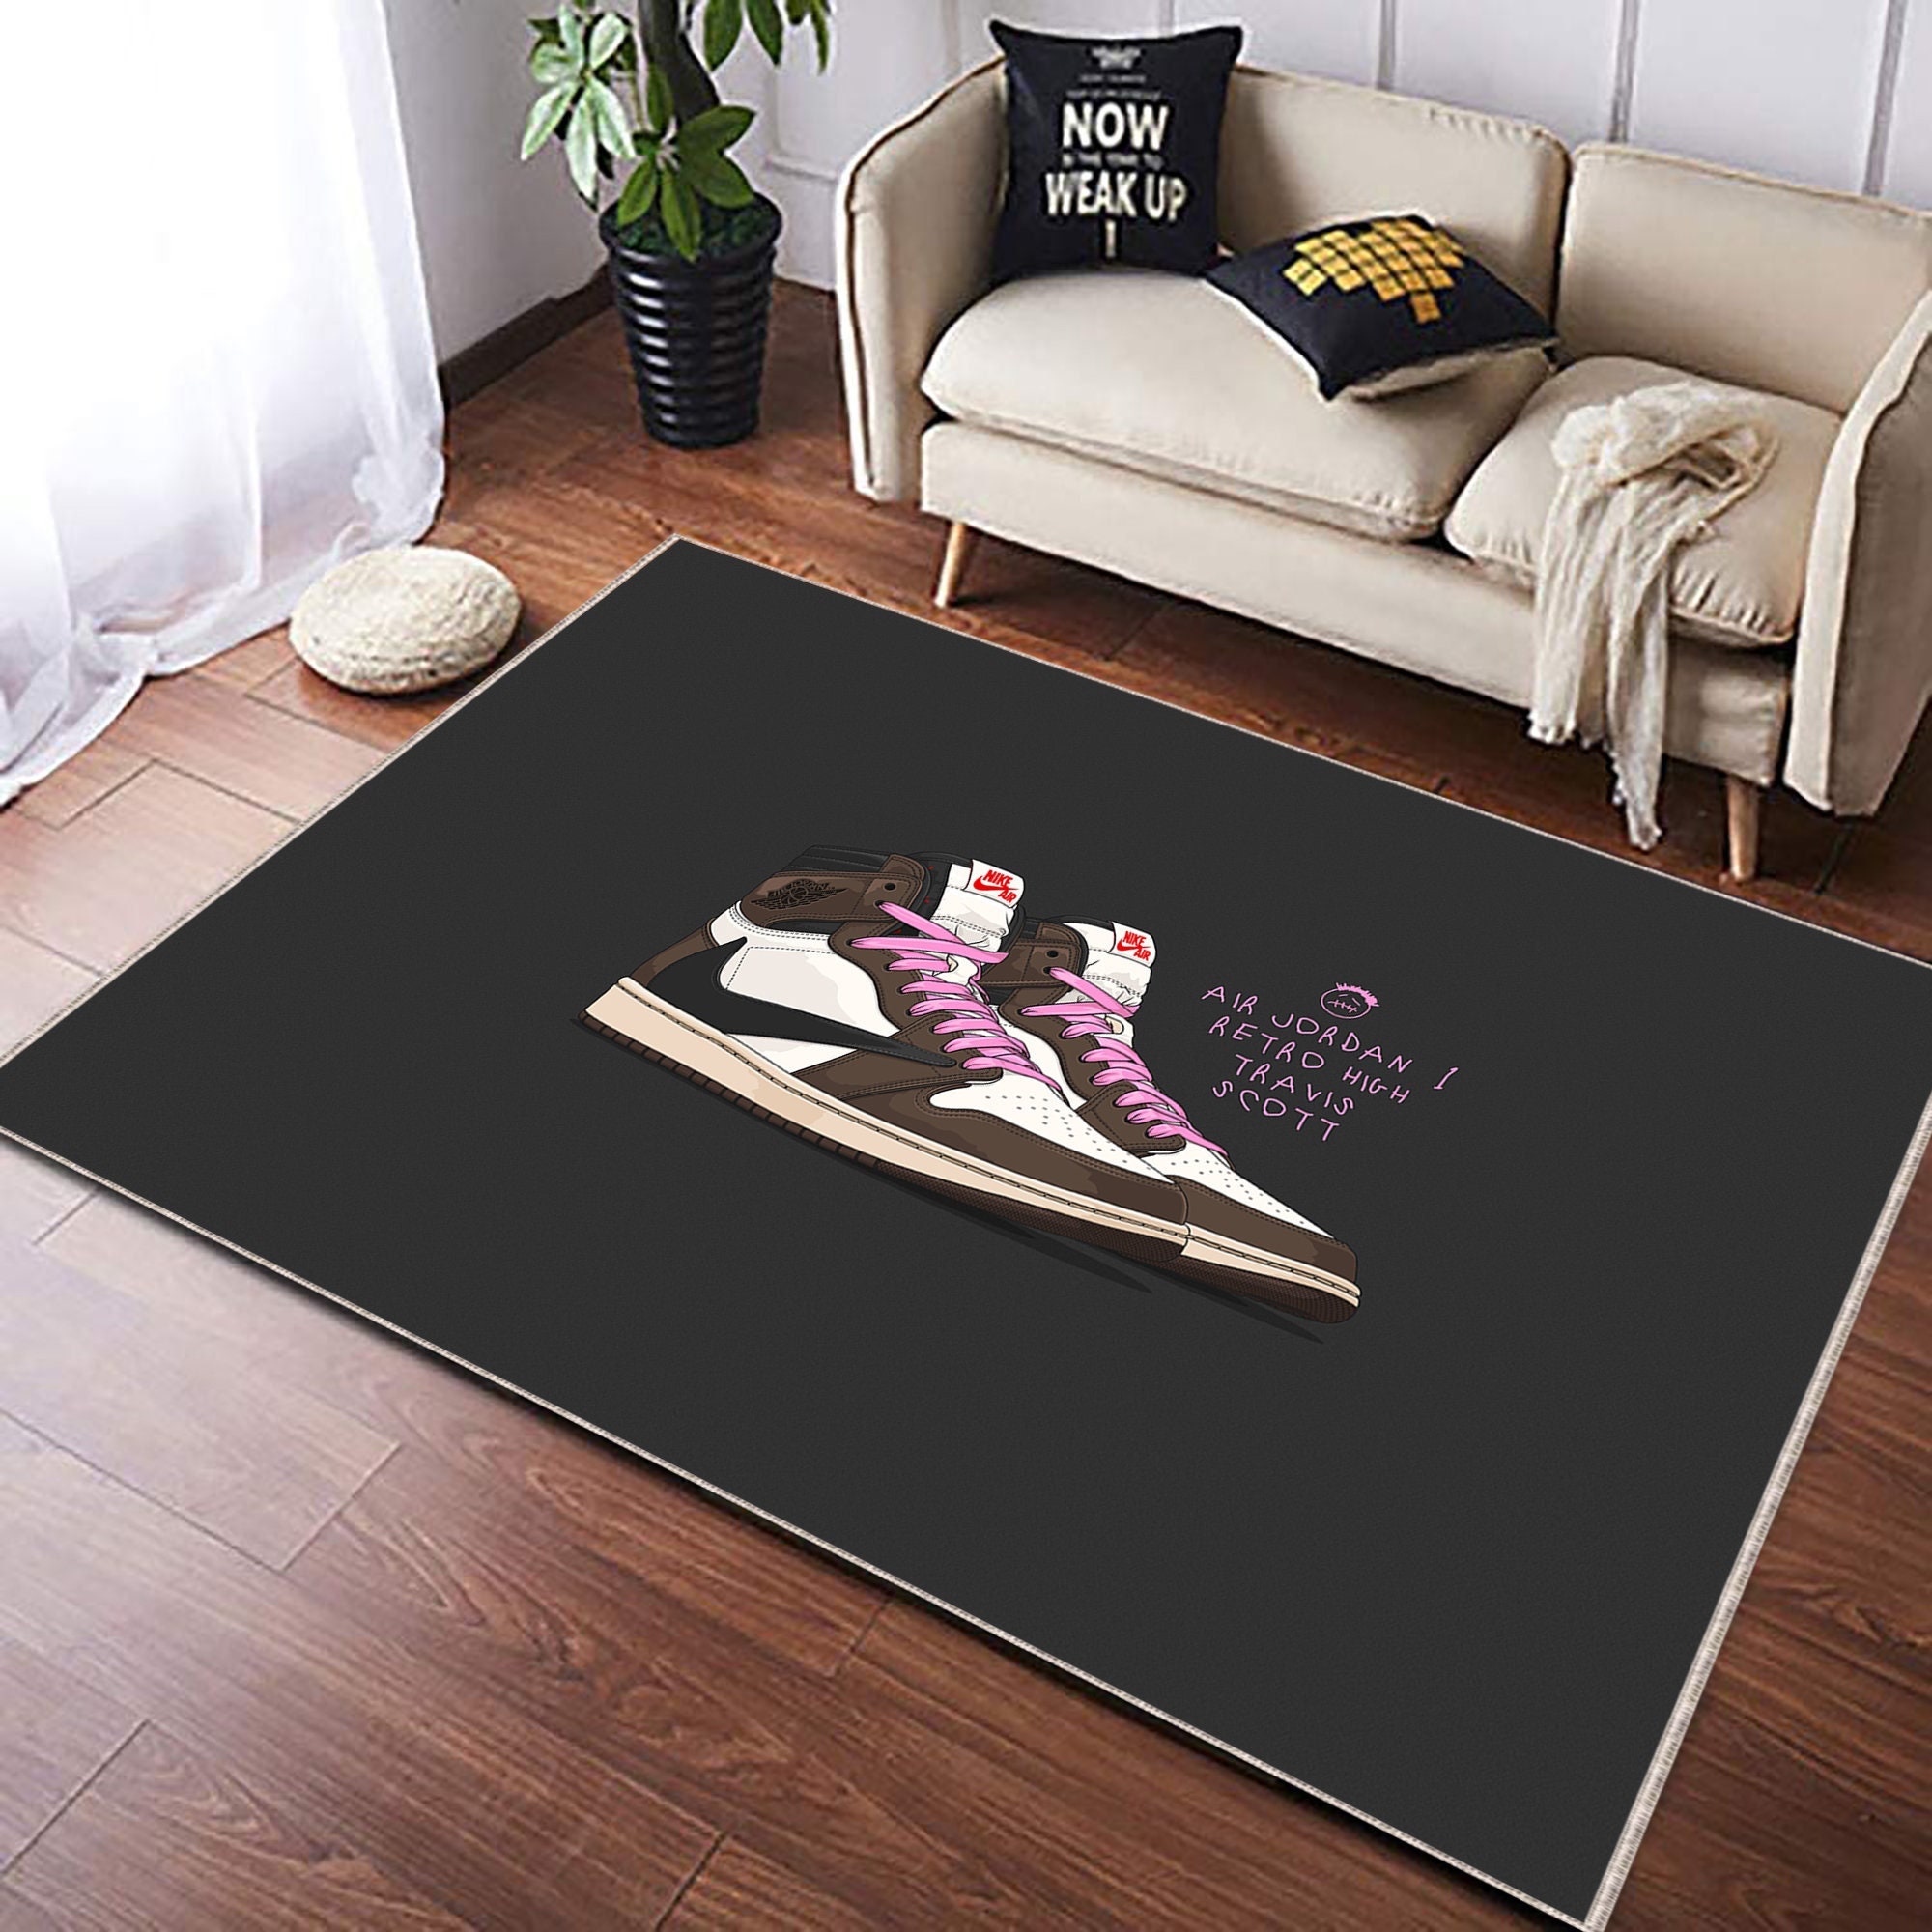 Square Rug 2022| Air Man Shoes Rug Shoes Mat Shoes Rug For Bedroom Air Decor Rug Trending Now Flying Sneakers Rug Rug For Shoes Room - Jordan Area Rug